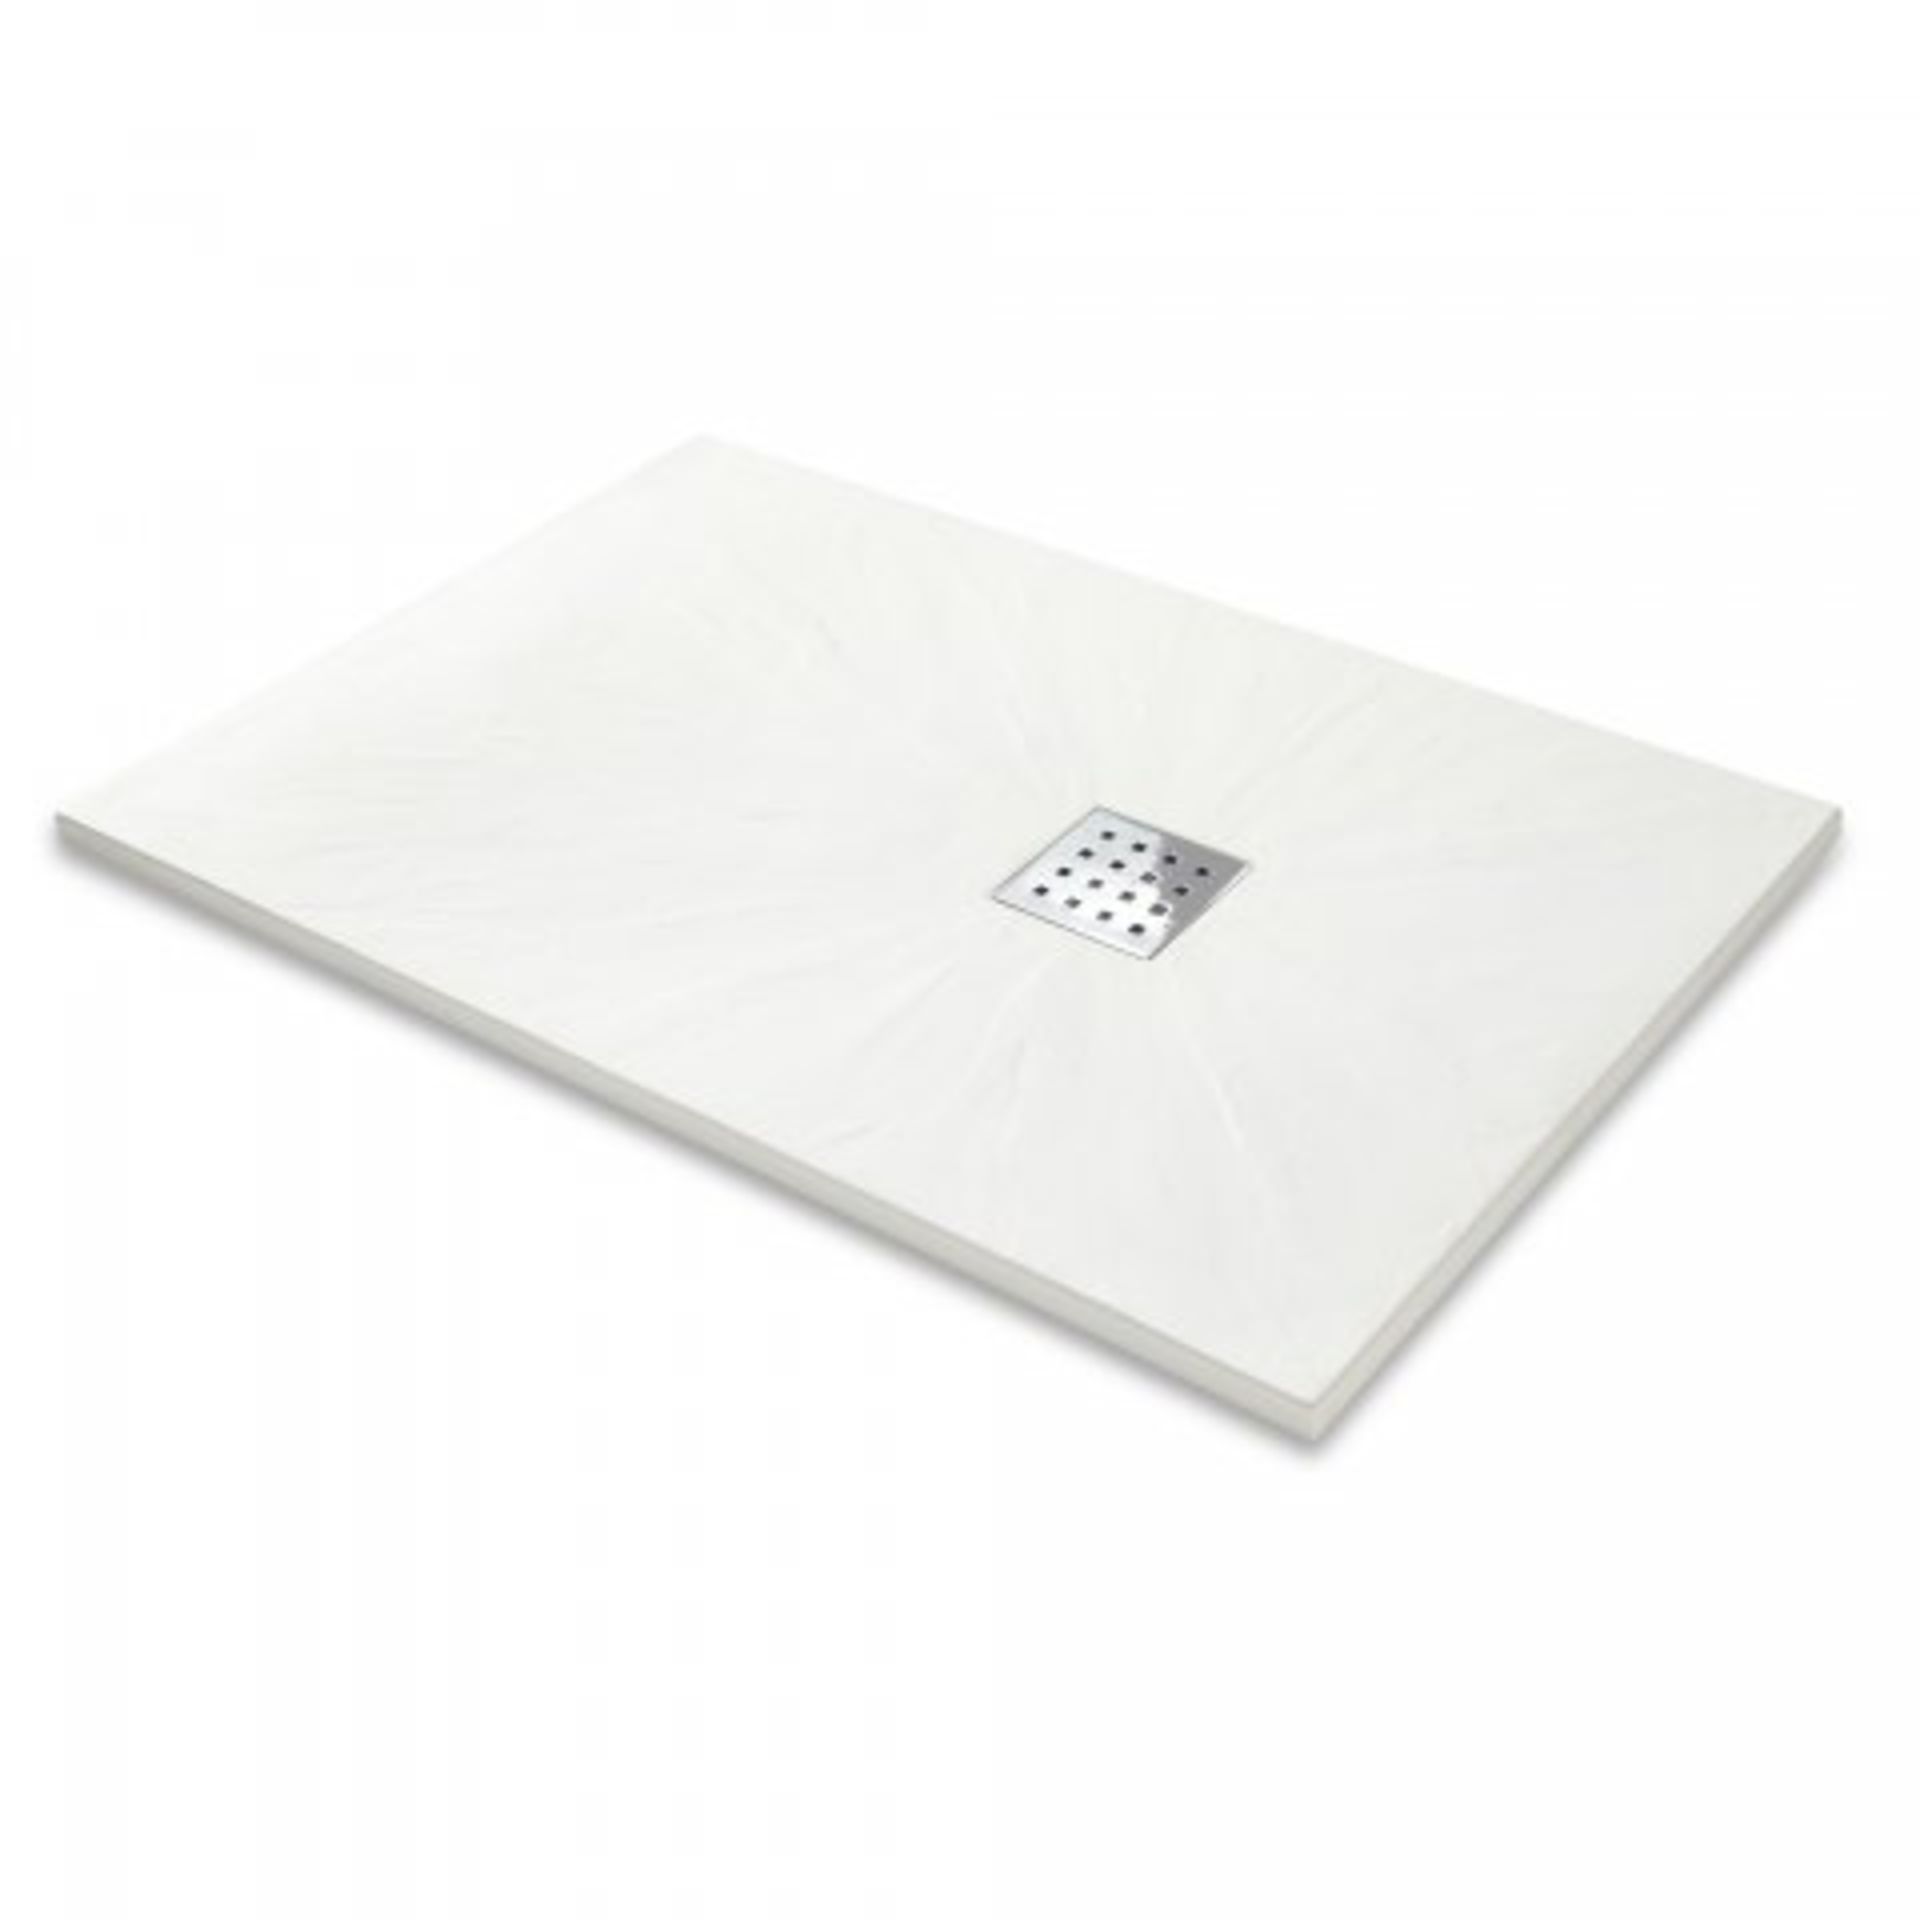 1000x800mm Rectangular White Slate Effect Shower Tray & Chrome Waste. RRP £499.99.Hand crafted... - Image 2 of 3